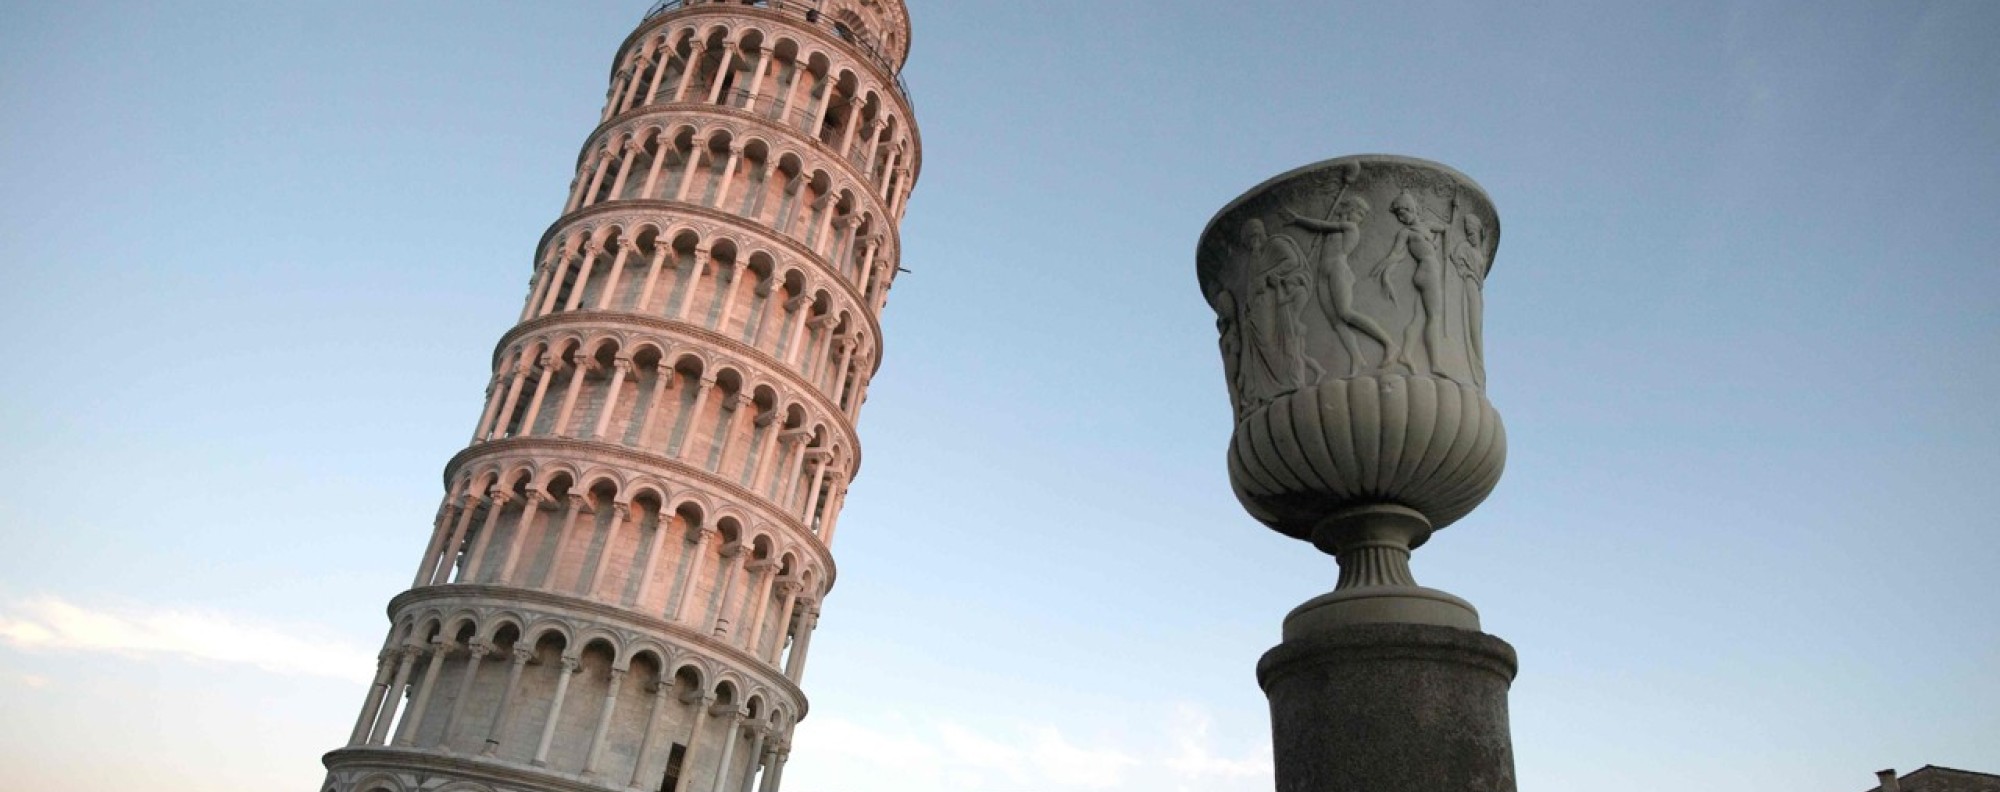 a) Side view of the Tower of Pisa with indication of the years of